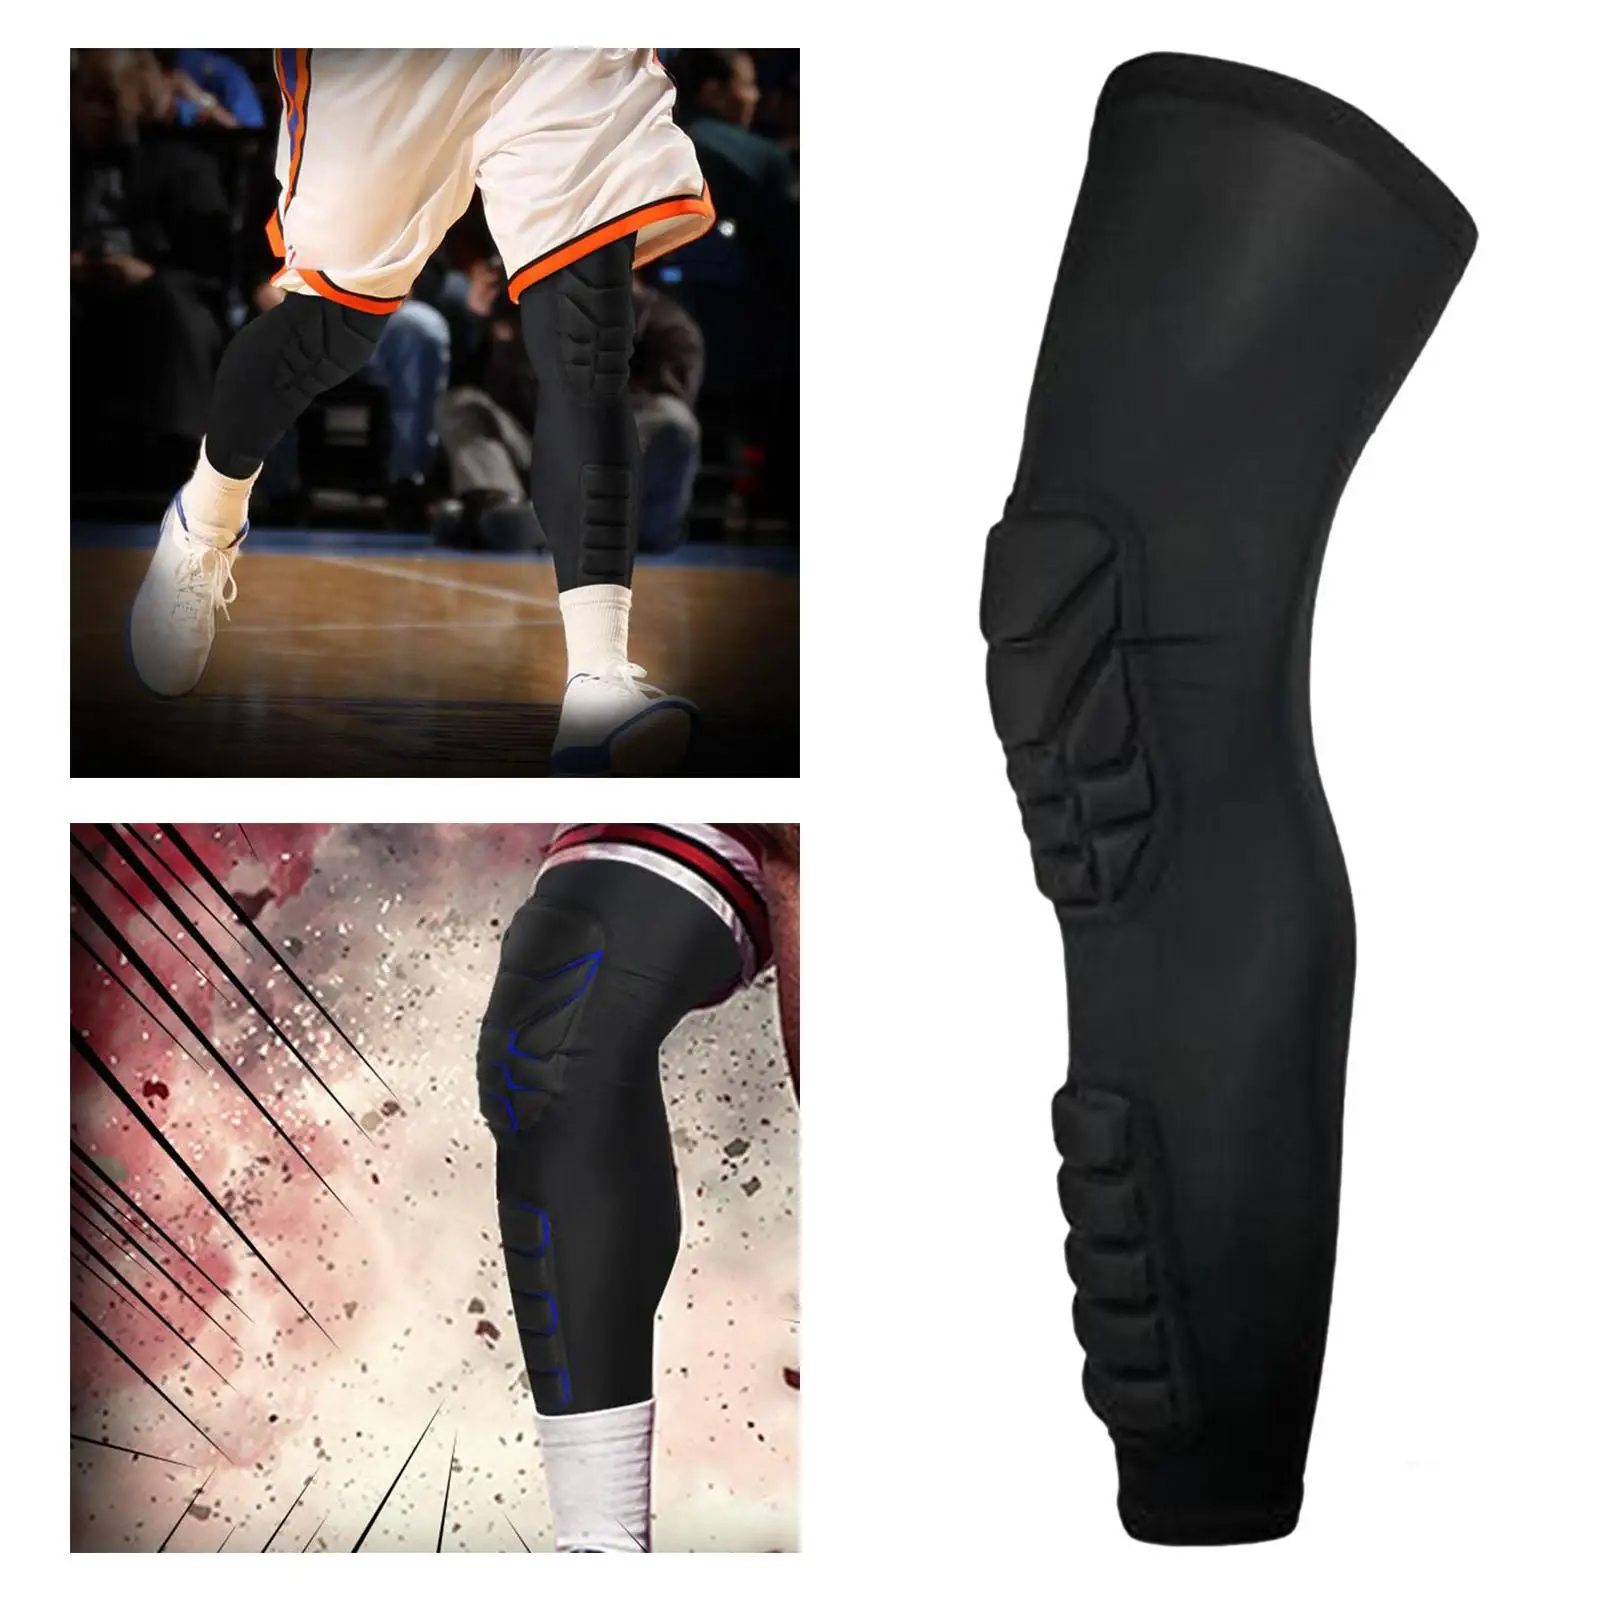 Protective Knee Calf Pads Compression Leg Sleeve for Tennis Football Hockey Snowboard